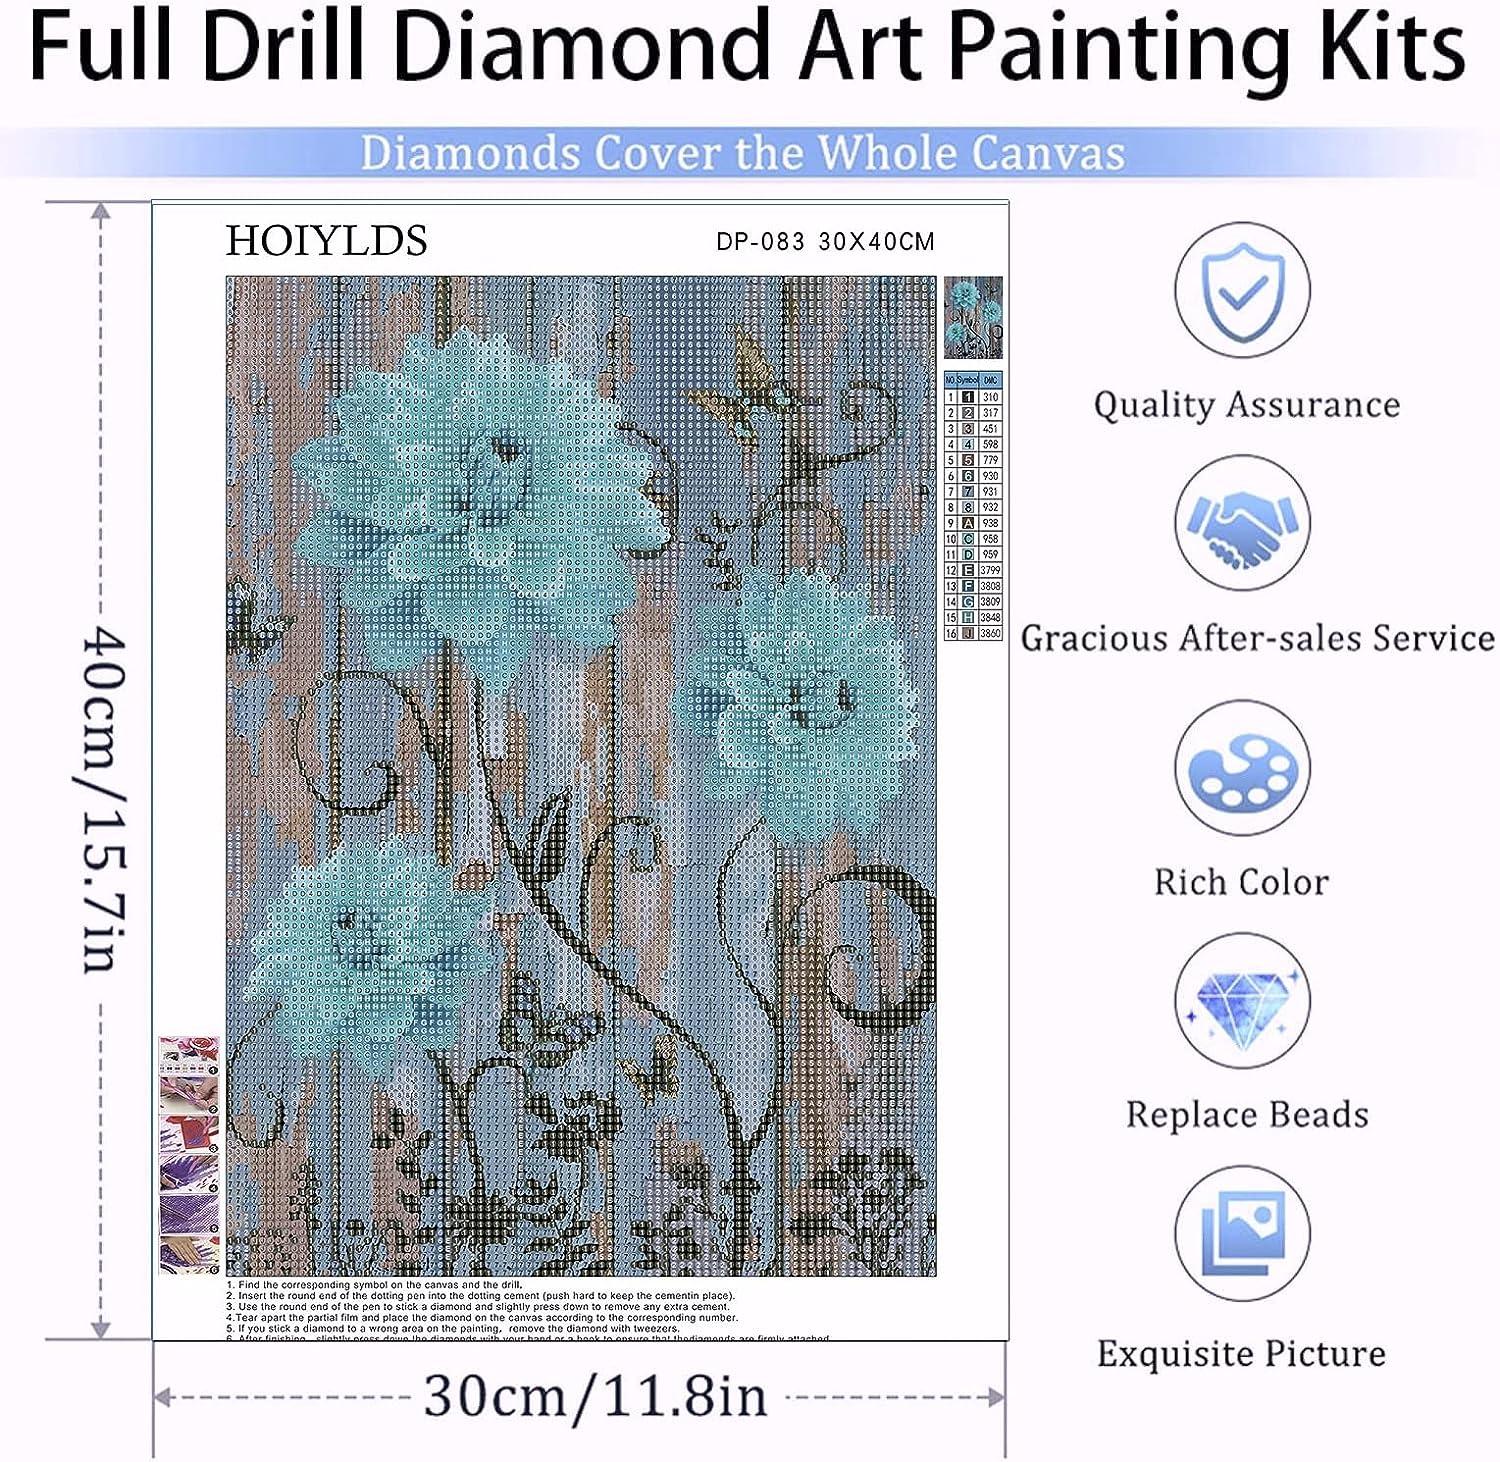 Rustic Flower Diamond Painting Kits for Adults - Farmhouse 5D Diamond Art Kits for Adults Beginner, DIY Full Drill Diamond Dots Paintings with Diamond